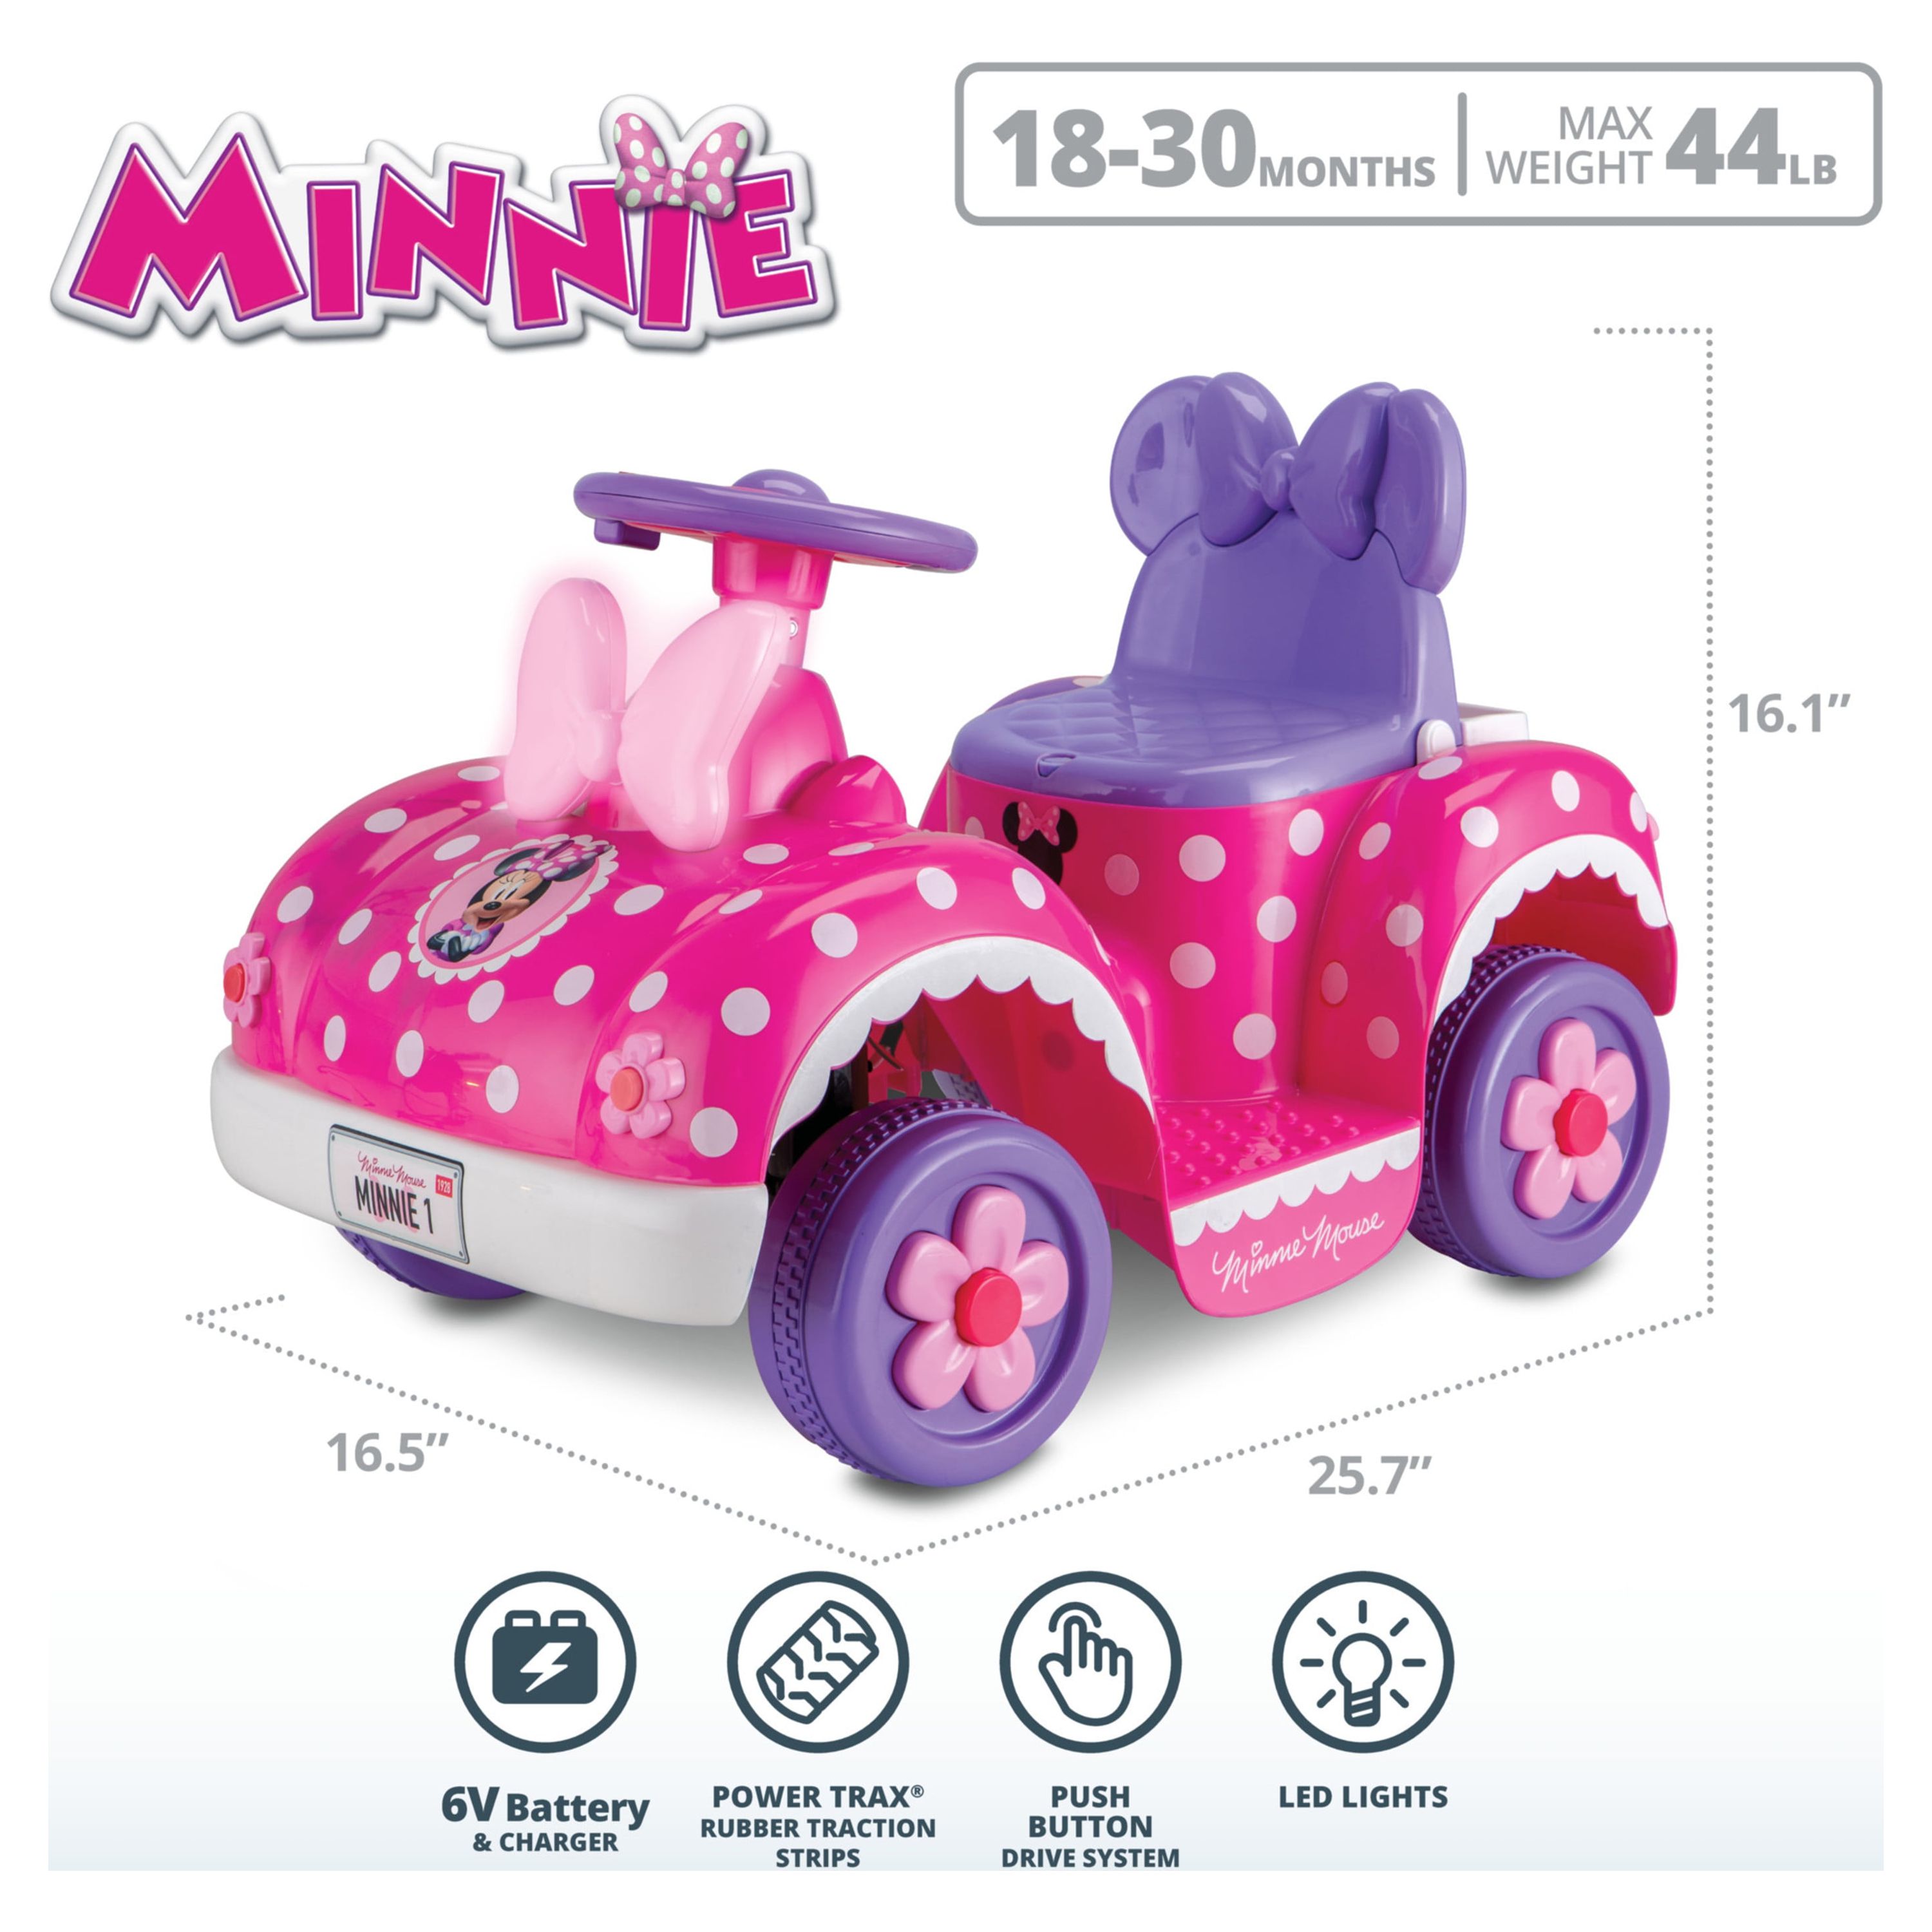 Disney Minnie Mouse Toddler Ride-On Toy - image 3 of 6